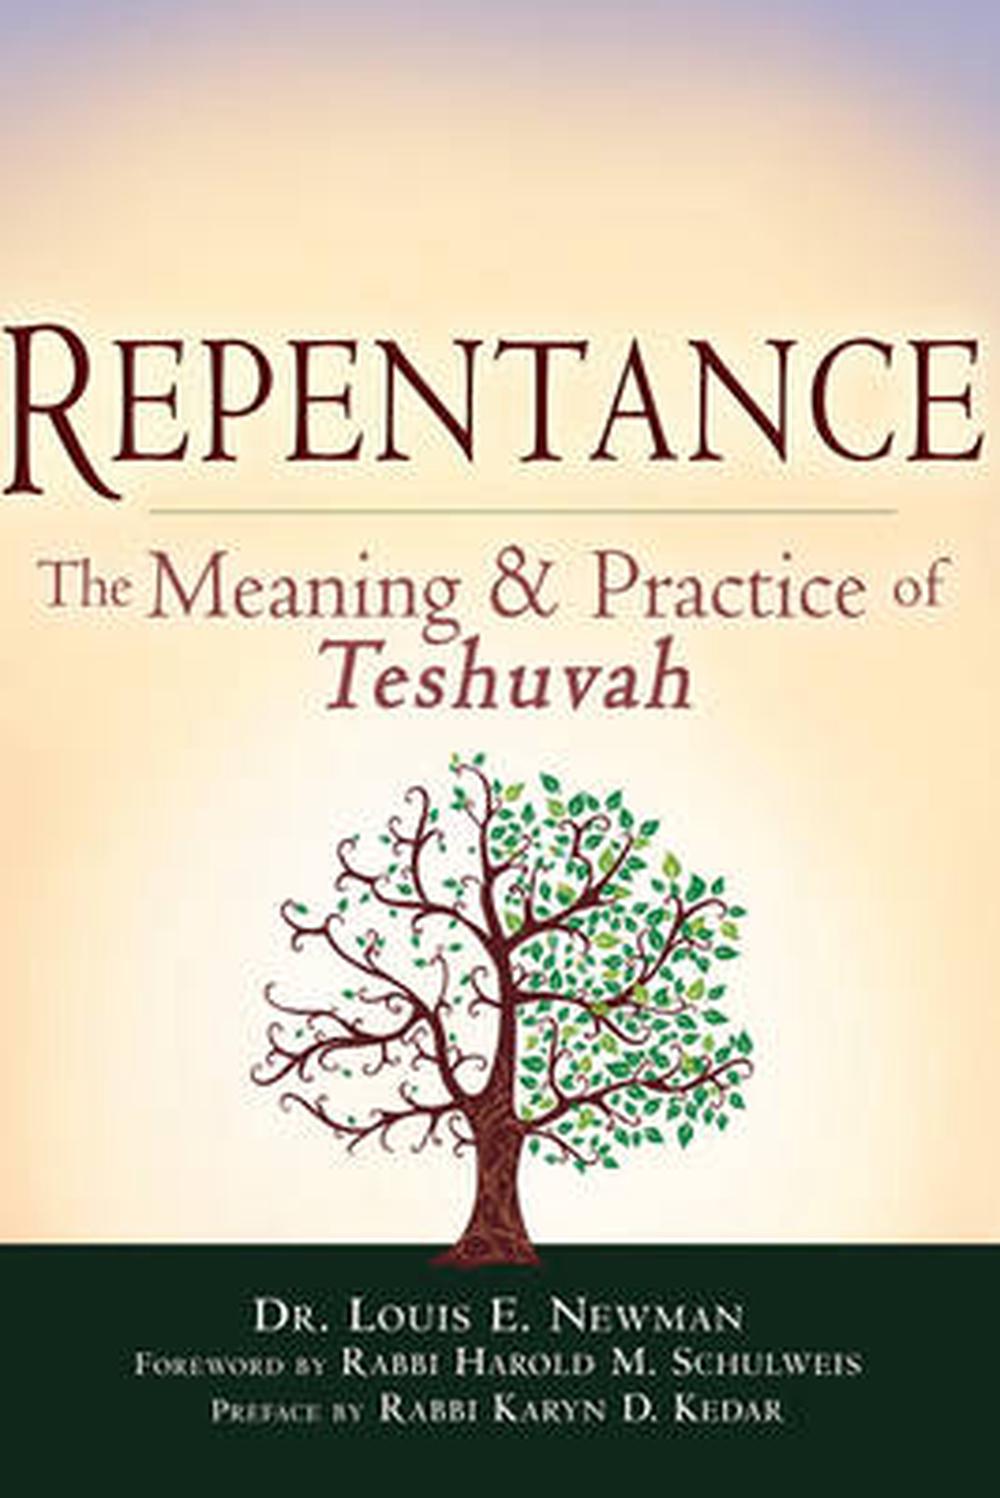 Repentance: The Meaning and Practice of Teshuvah by Louis E. Newman (English) Pa 9781580237185 ...